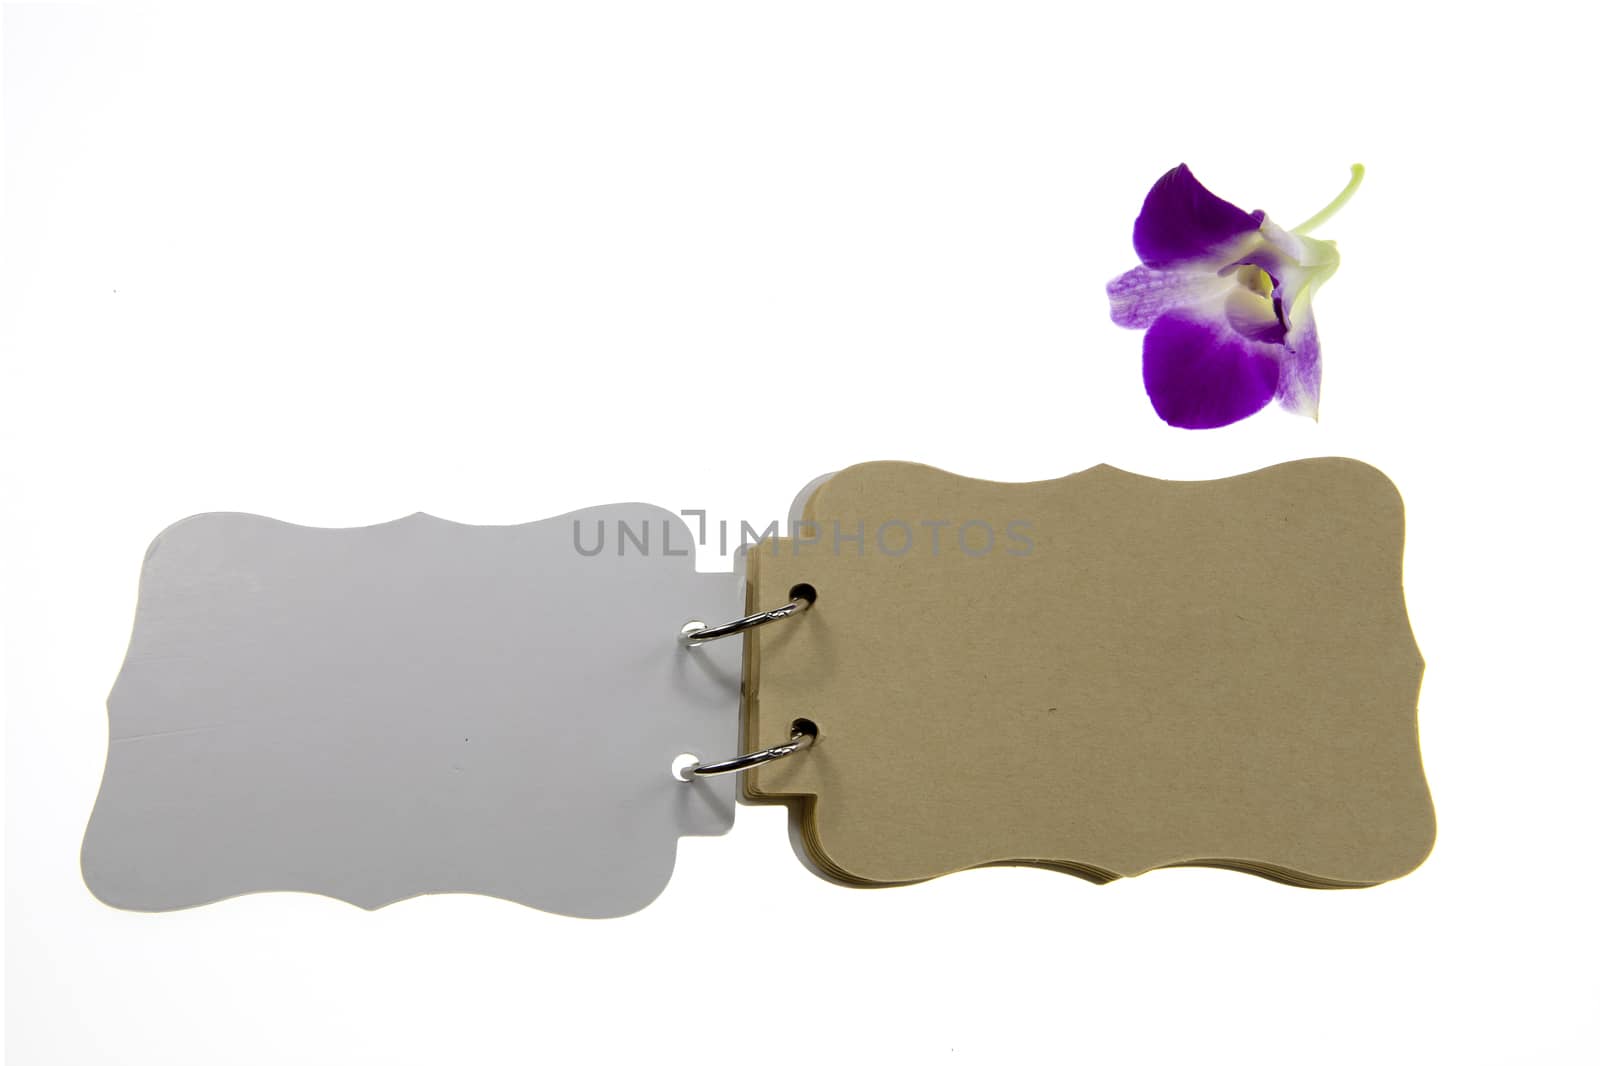 Note book and orchid on isolated white background